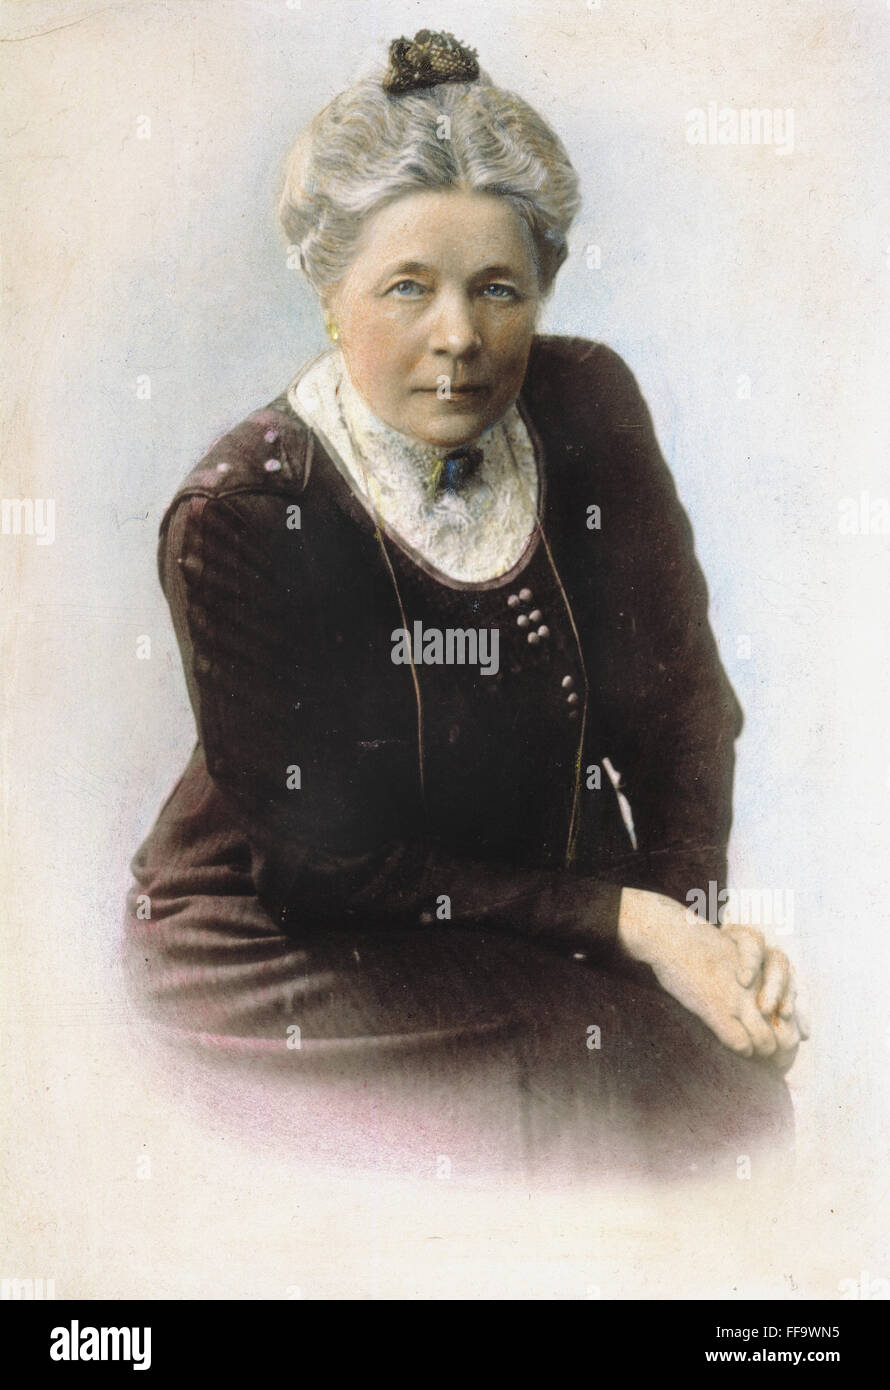 SELMA LAGERL╓F (1858-1940). /nSwedish novelist and poet. Oil over a photograph, c1910. Stock Photo